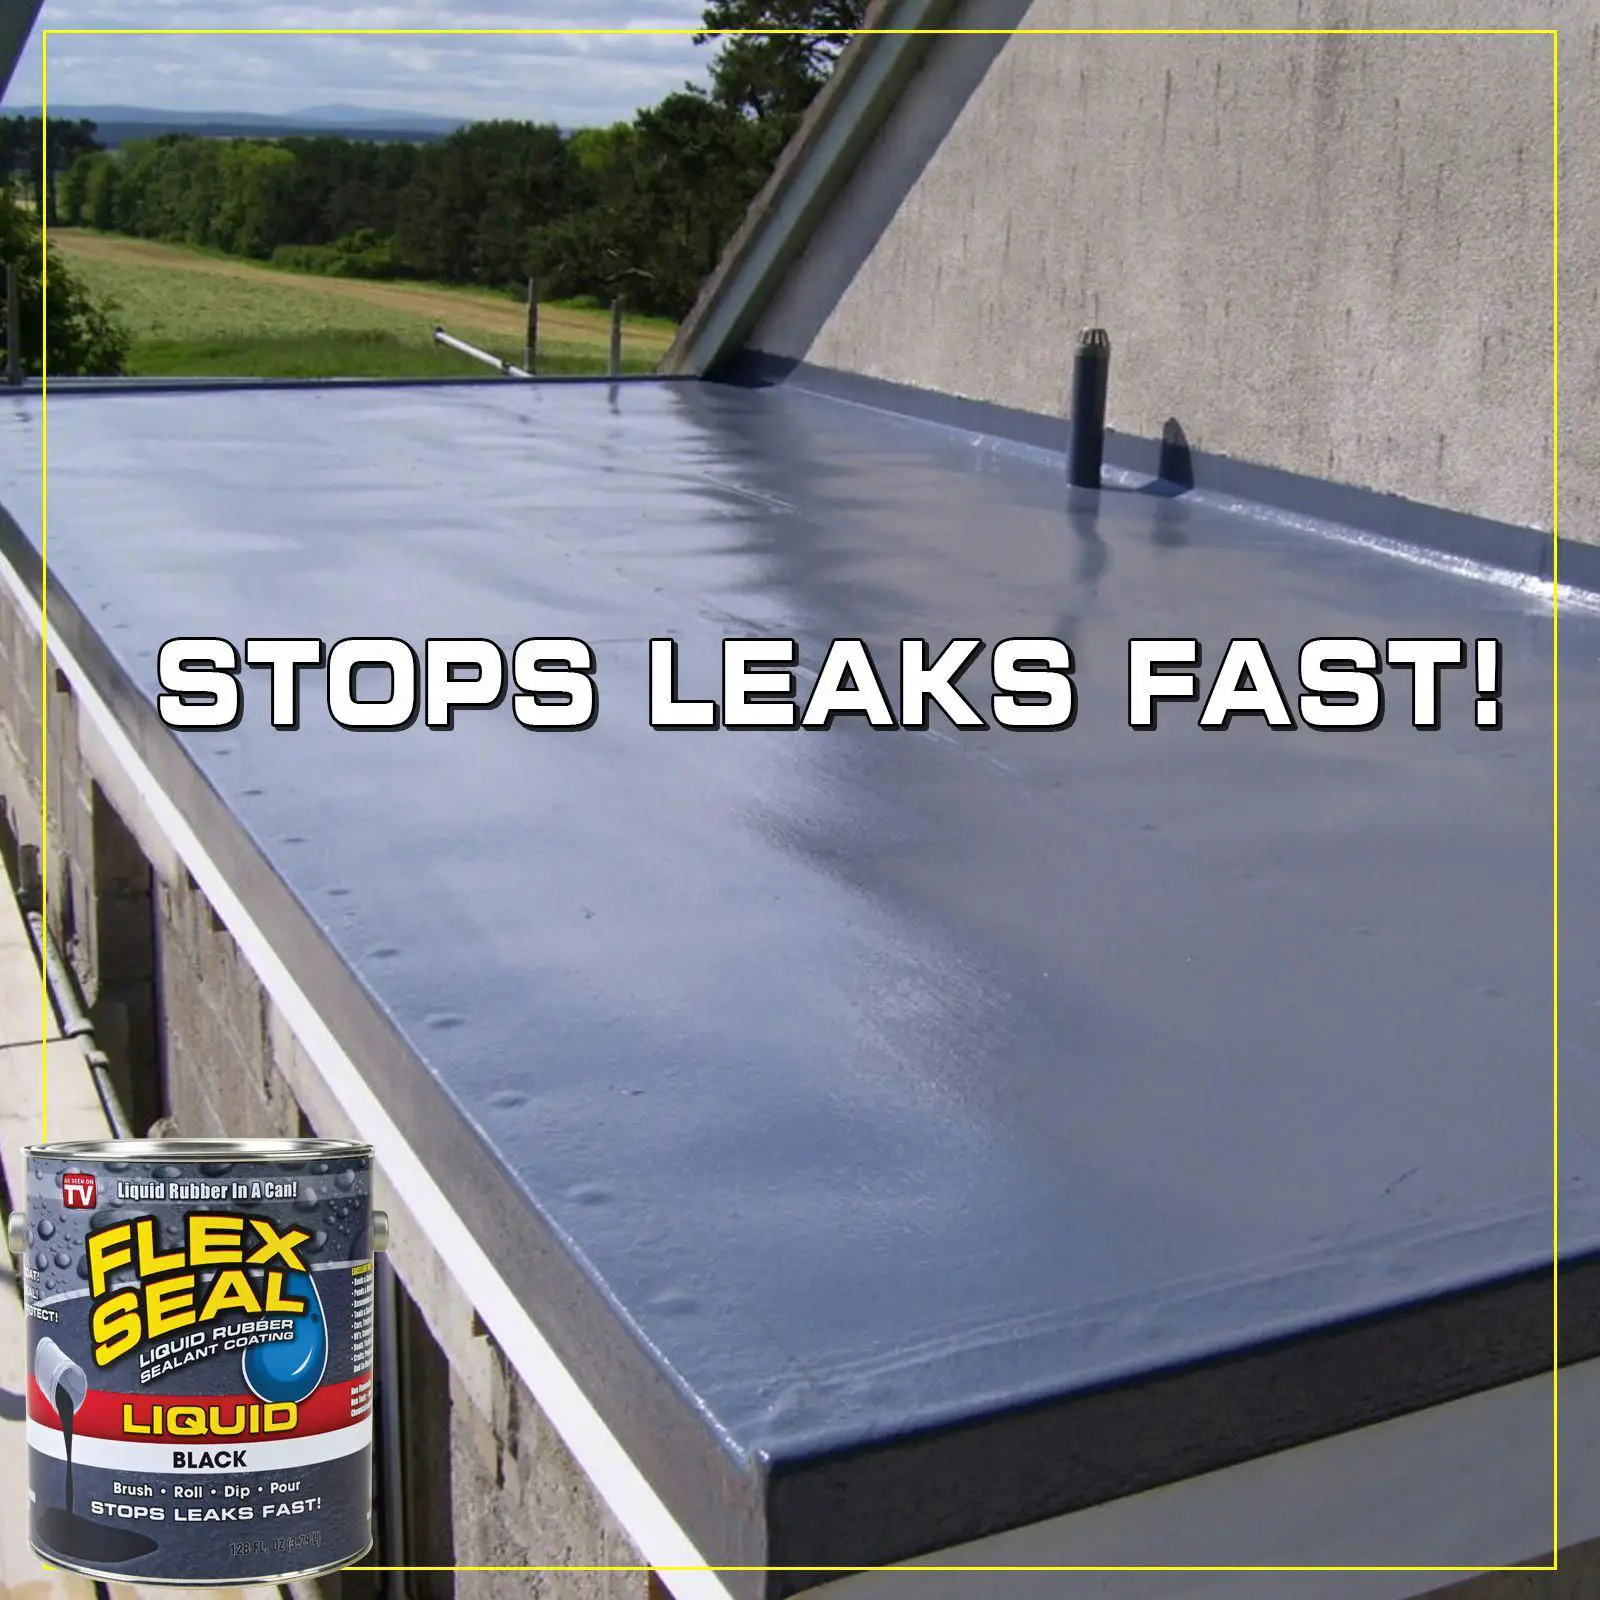 FLEX SEAL® LIQUID is liquid rubber in a can! Now you can ...